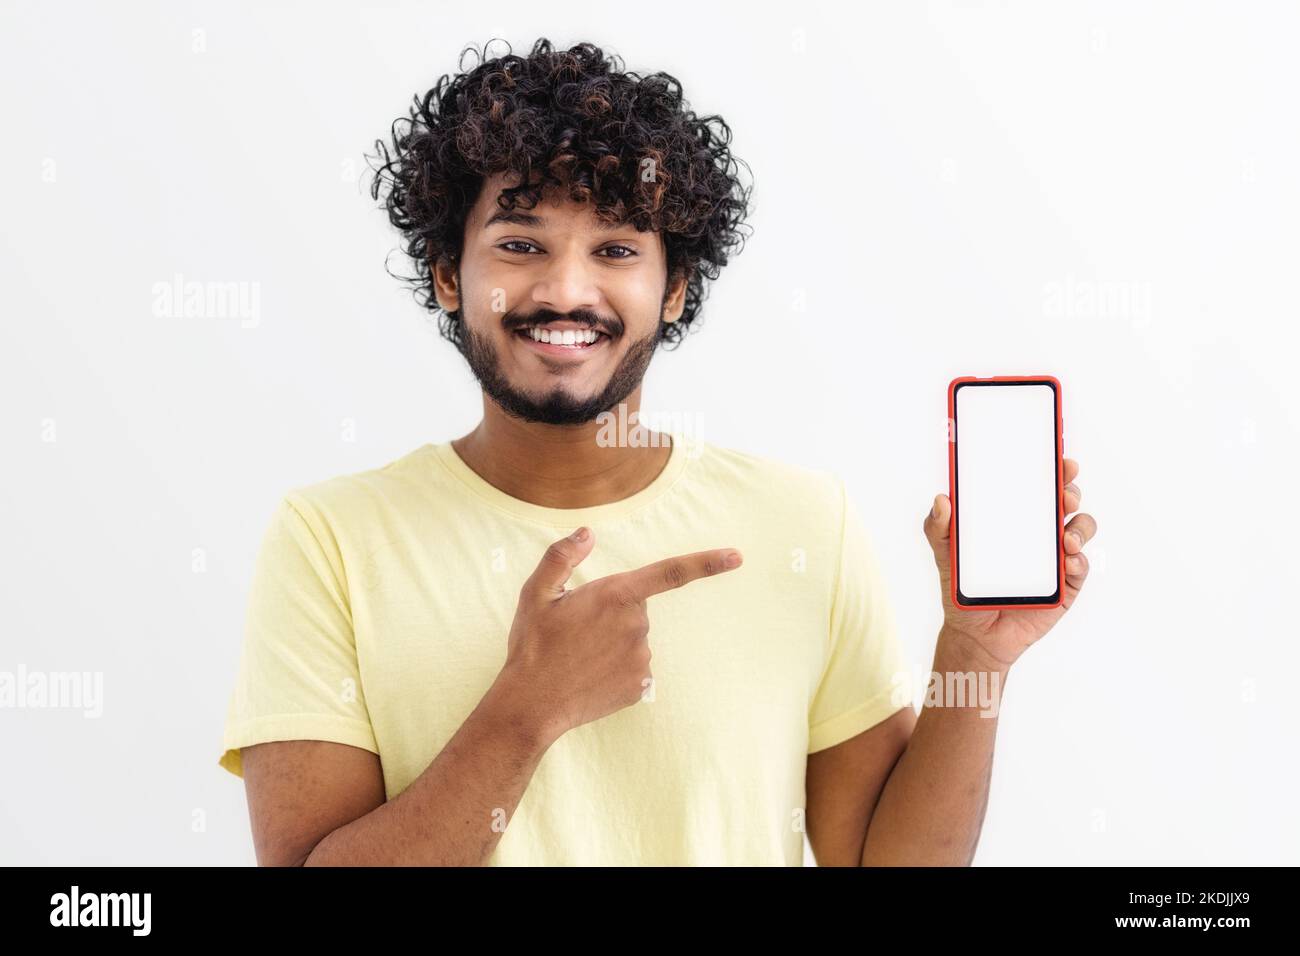 Happy Indian man student standing with mobile phone, pointing his ...